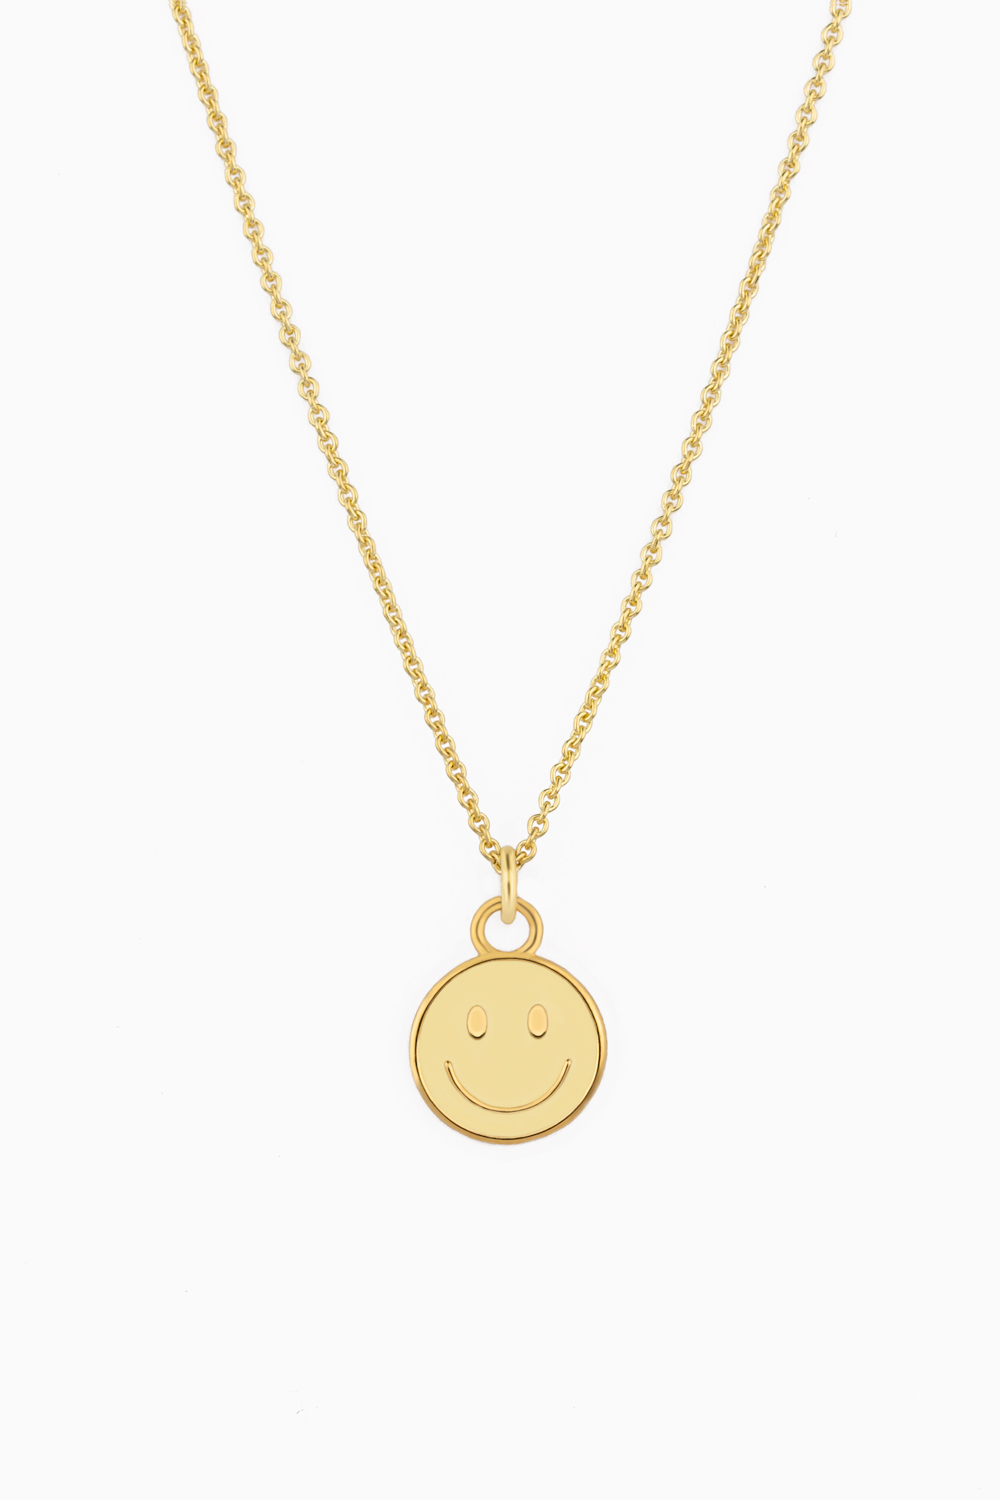 smiley-necklace1